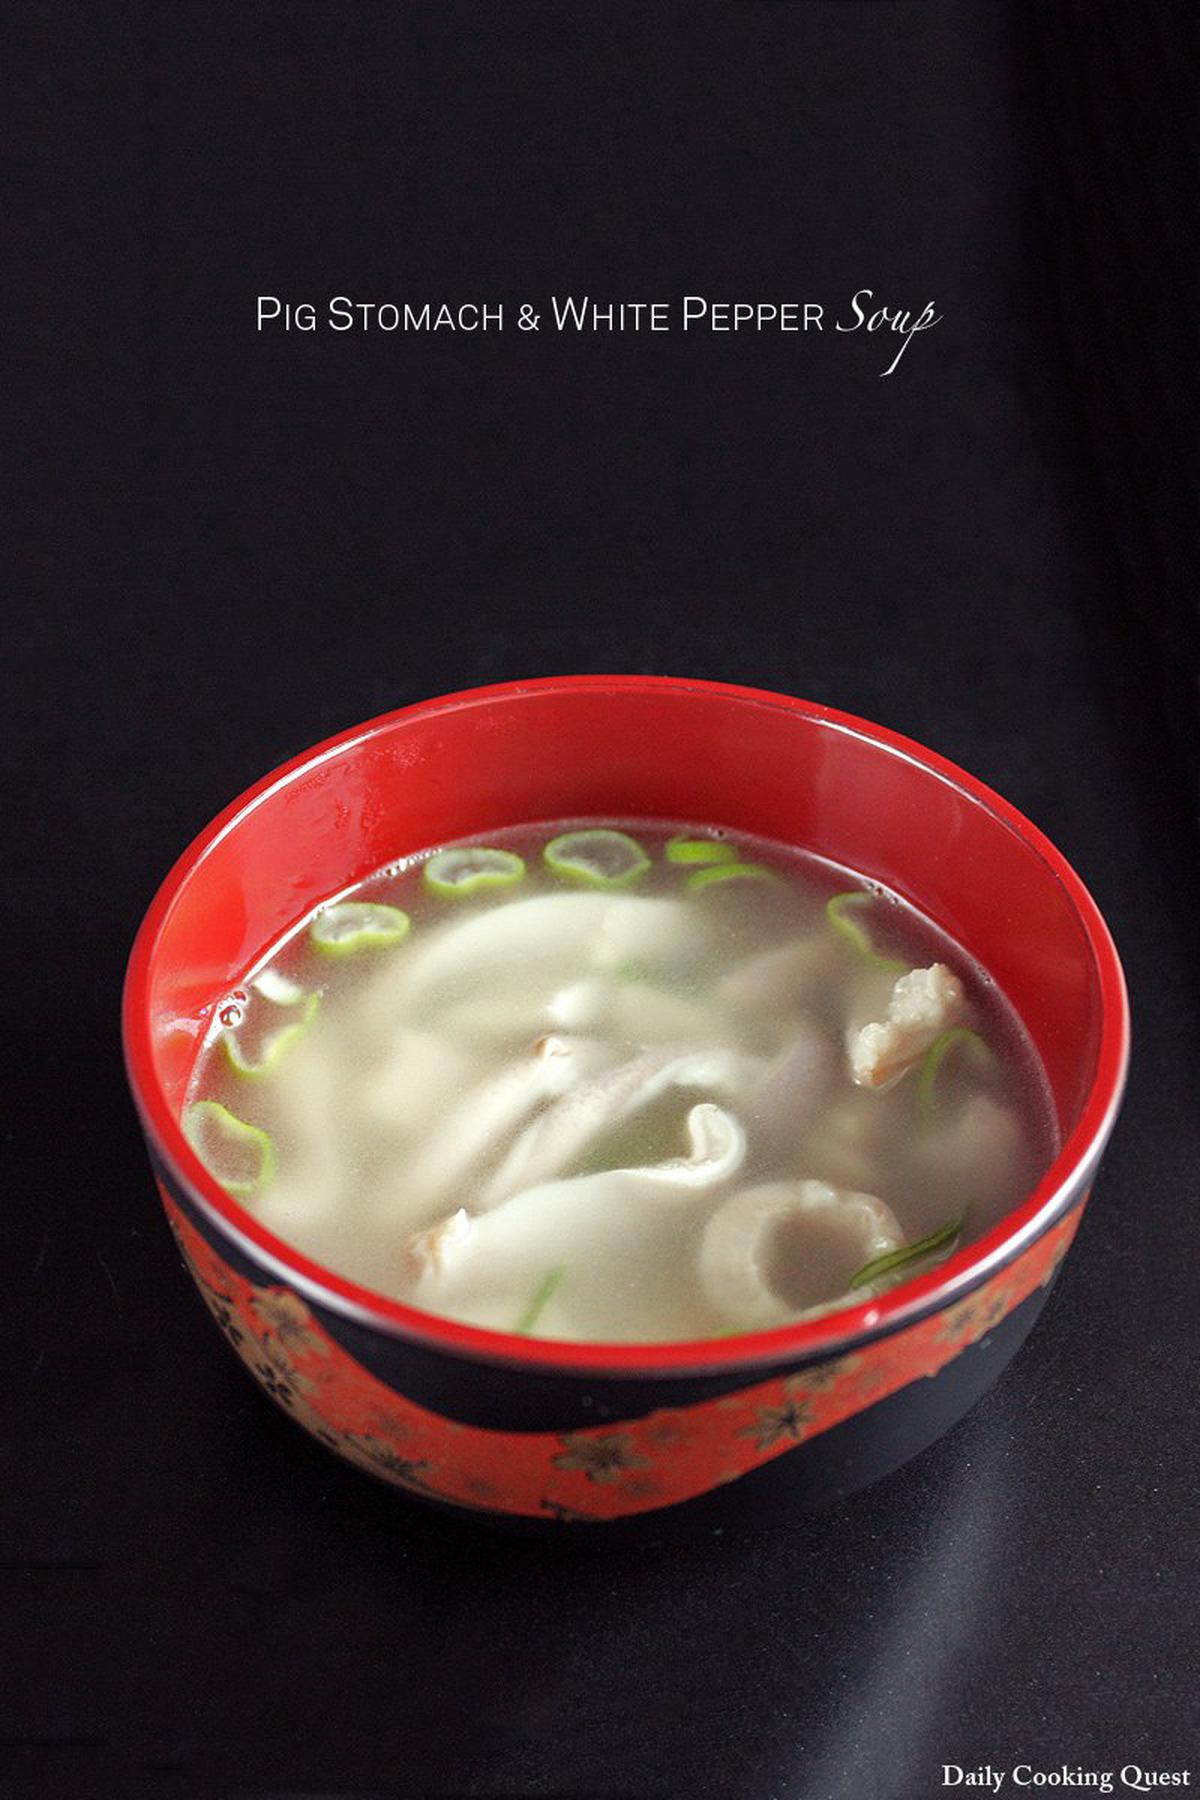 Pig Stomach and White Pepper Soup